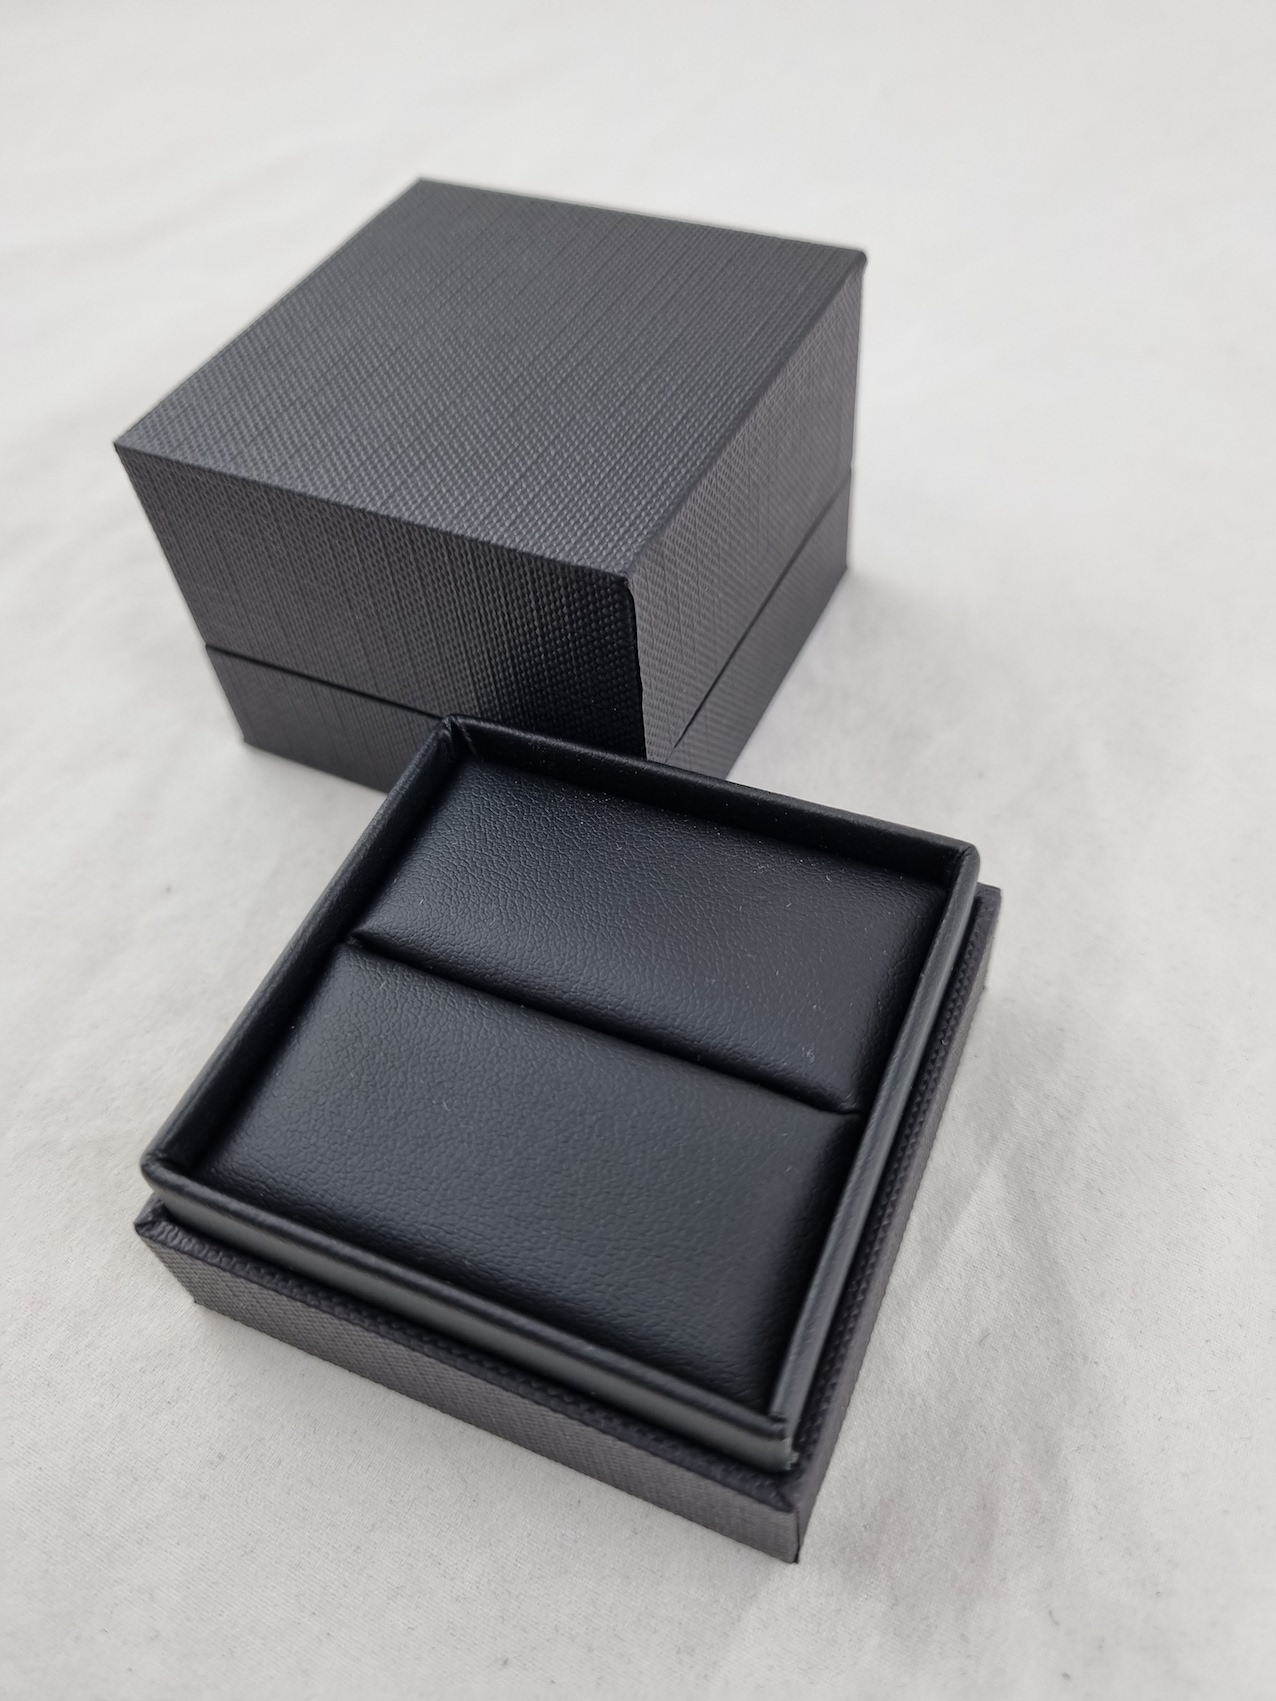 Black Delight - Products - Platinum Packaging